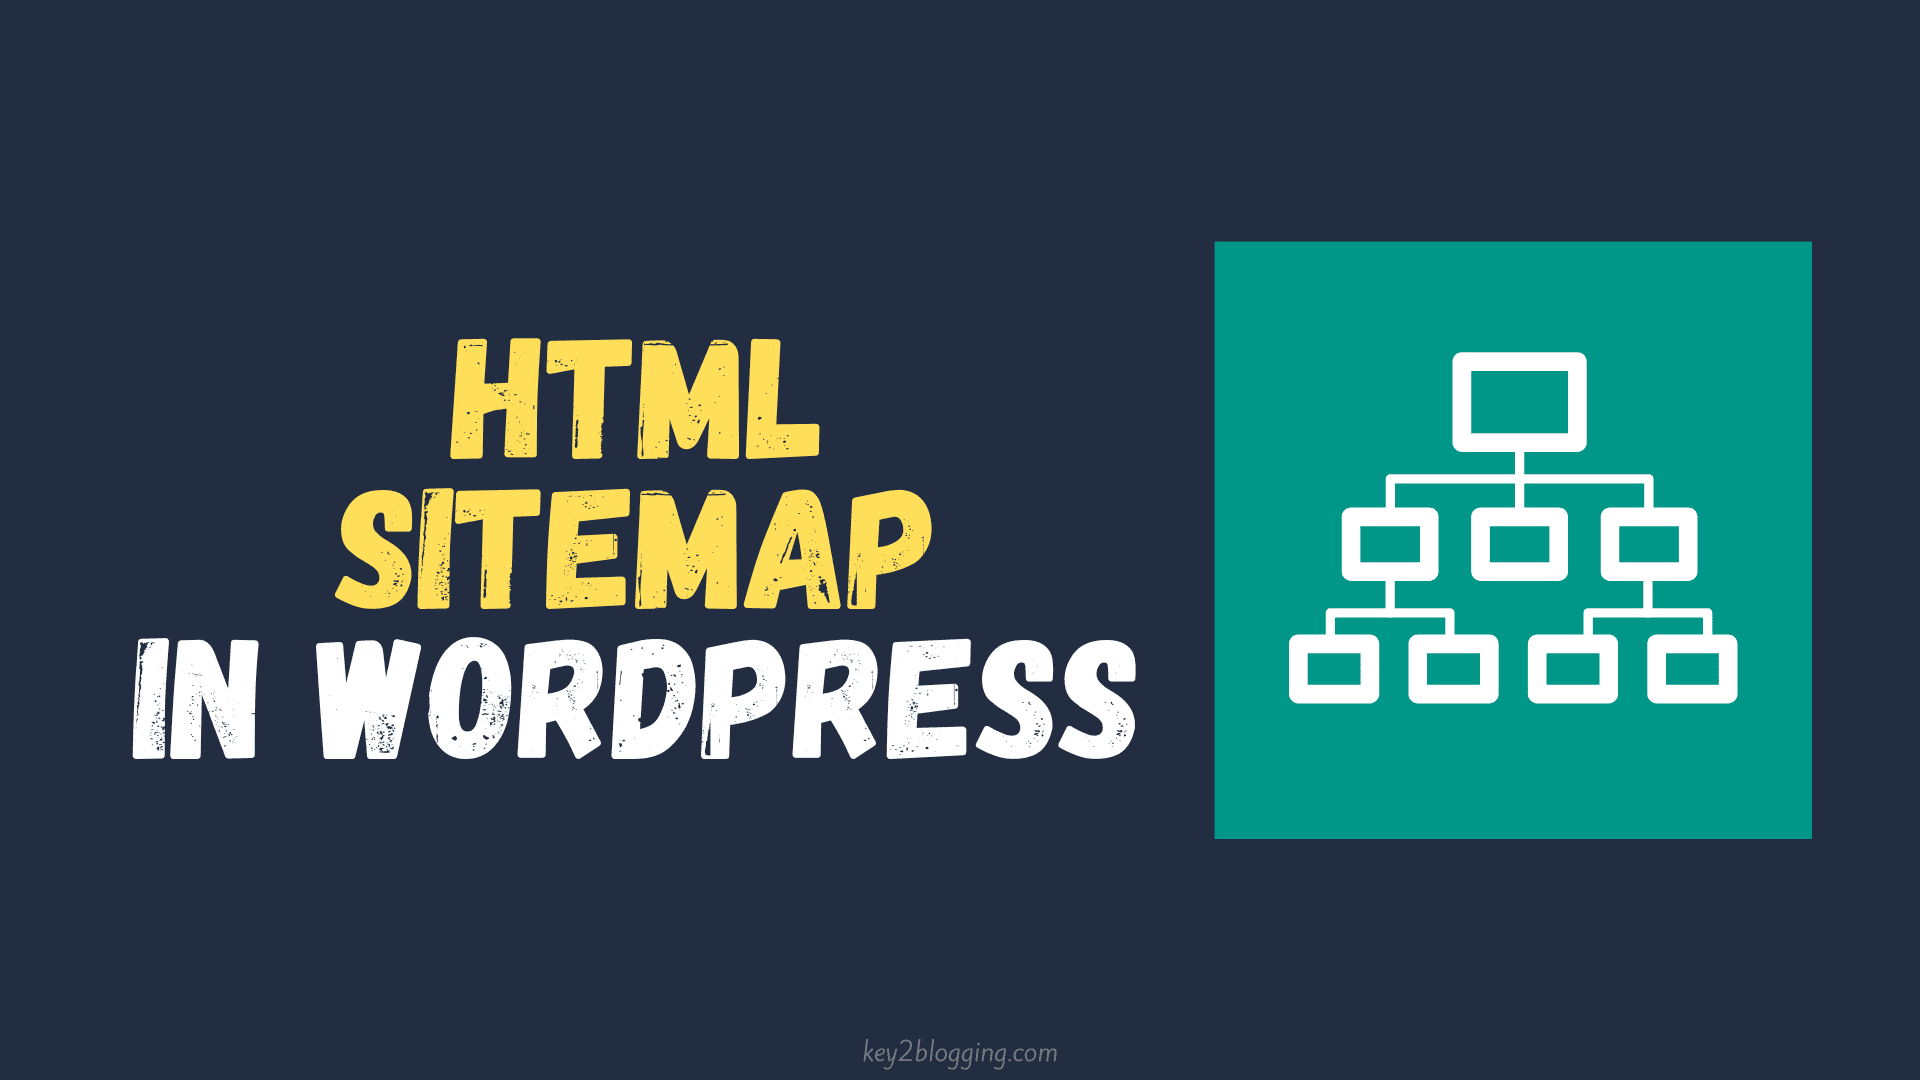 How to Add an HTML Sitemap Page in WordPress